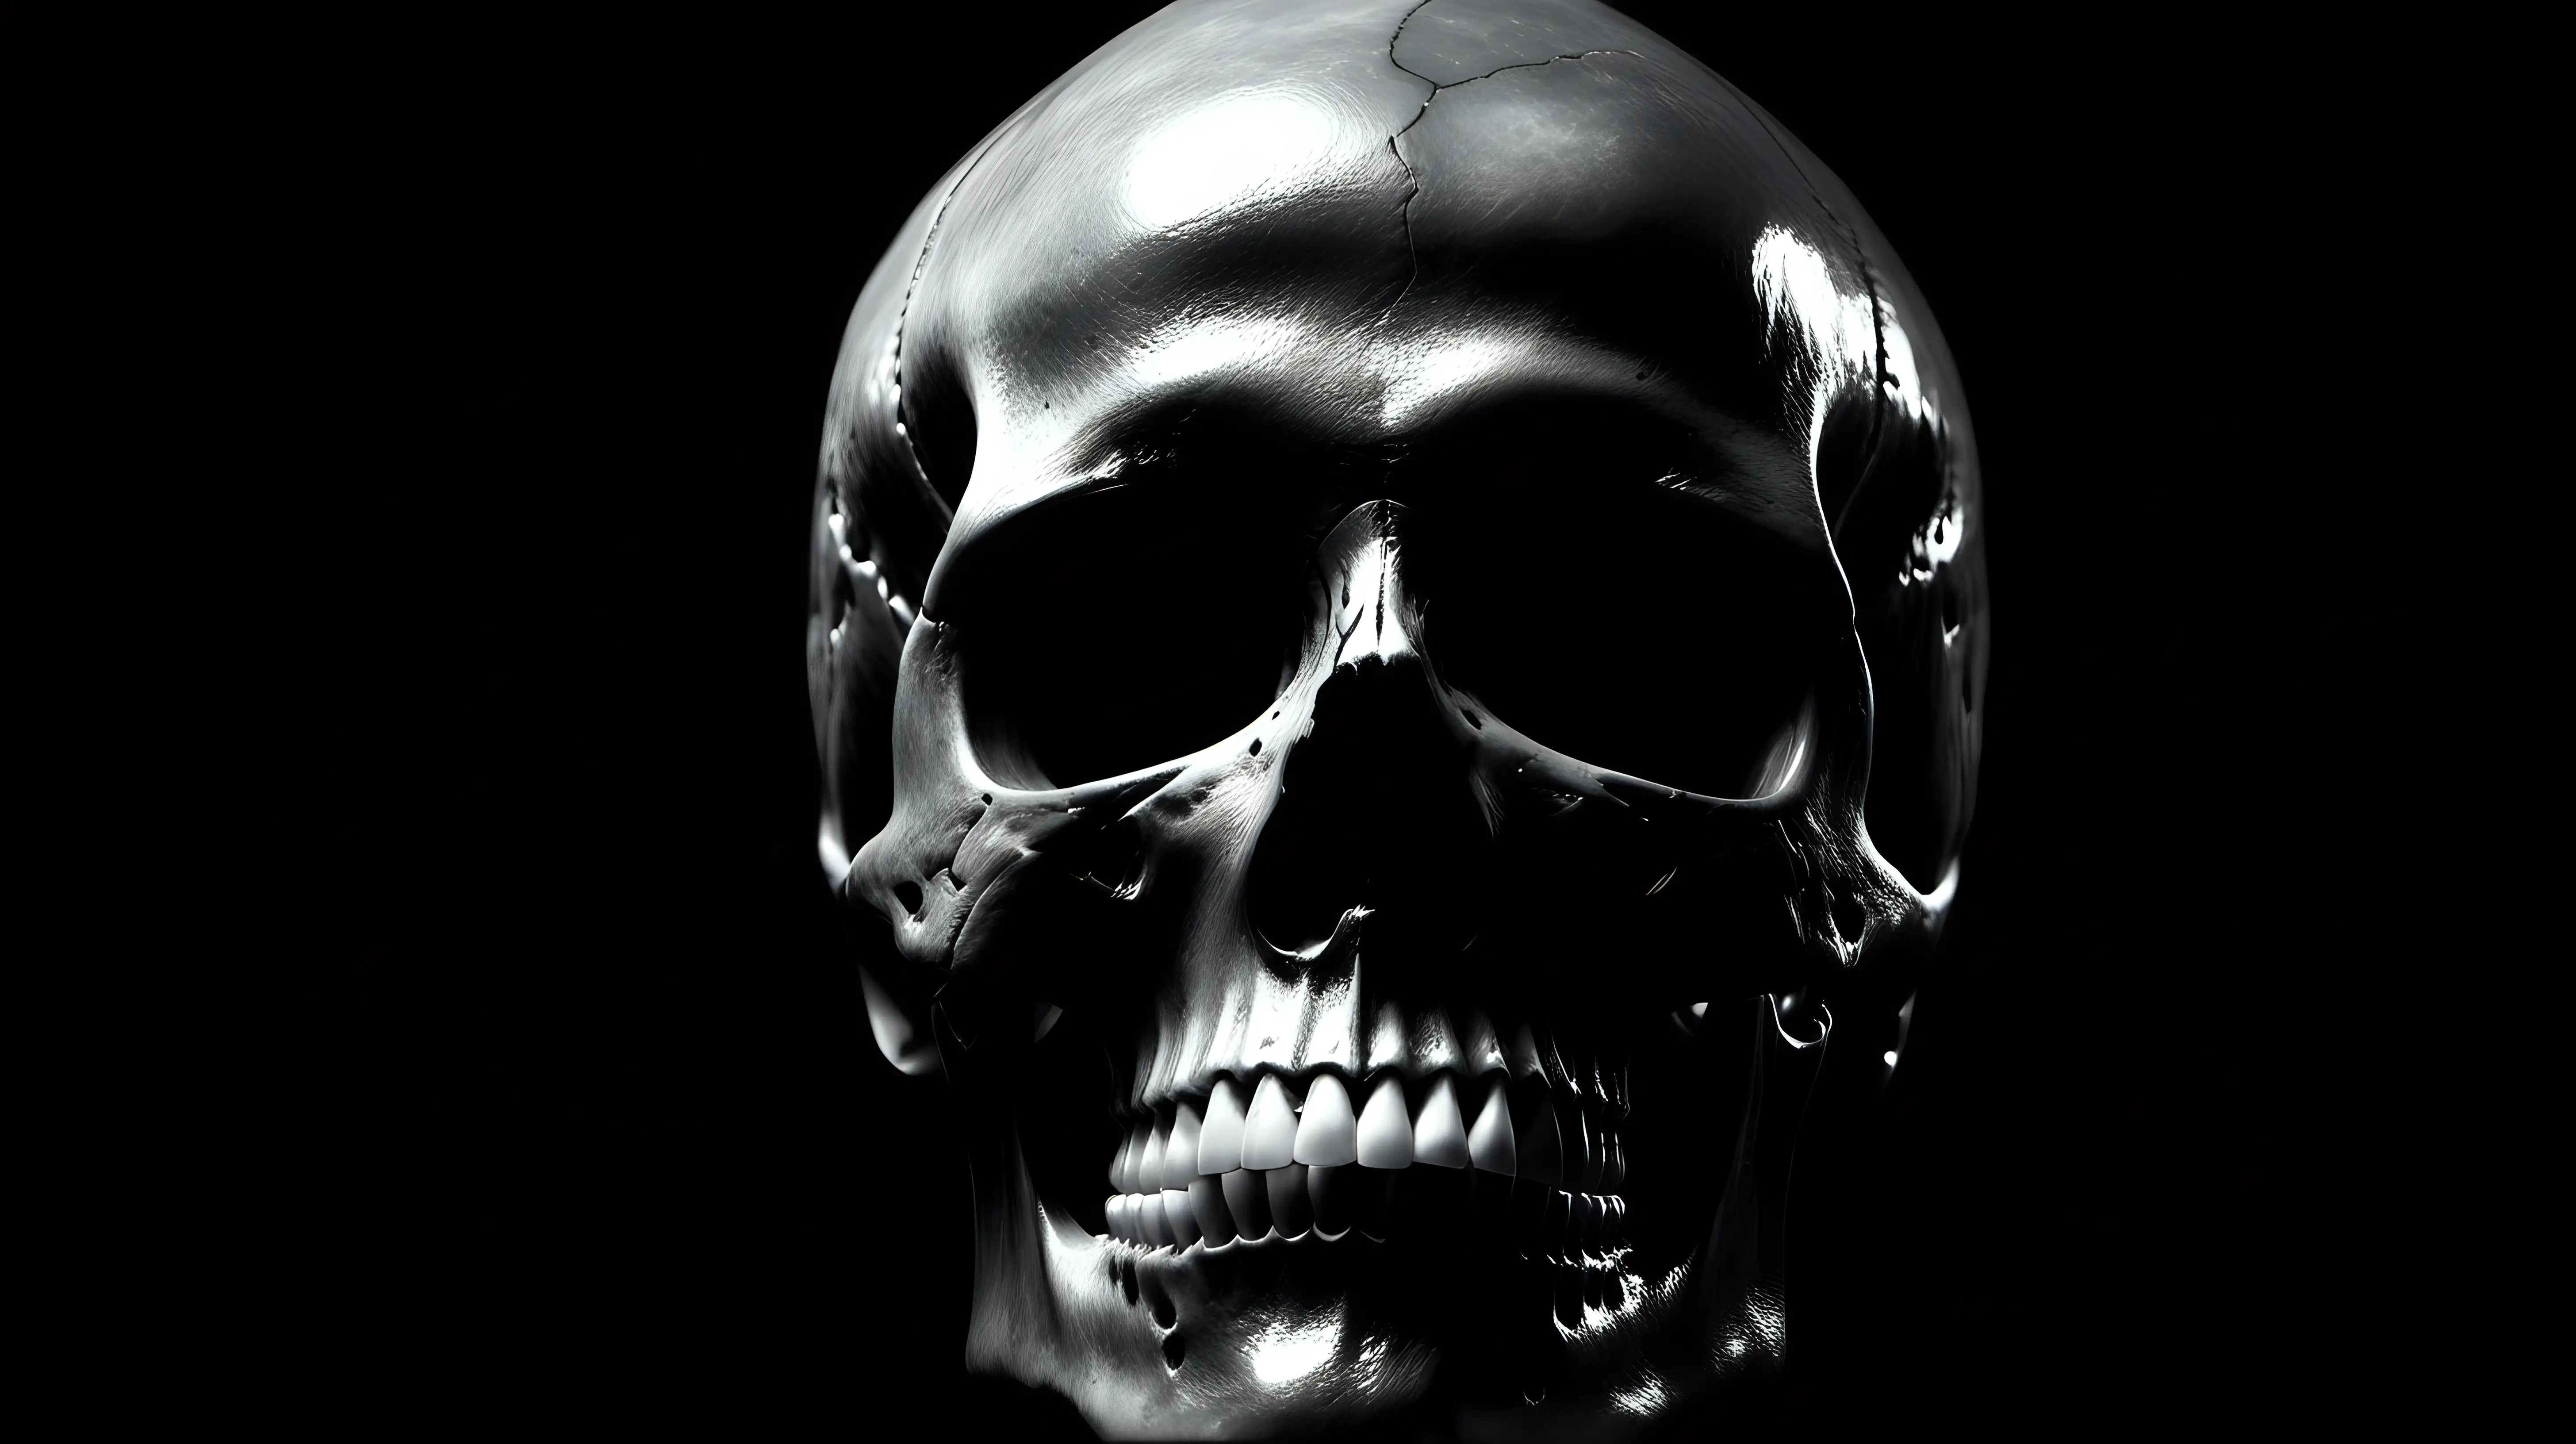 A striking visual of a human skull emerging from the blackness, evoking a sense of mortality and contemplation.